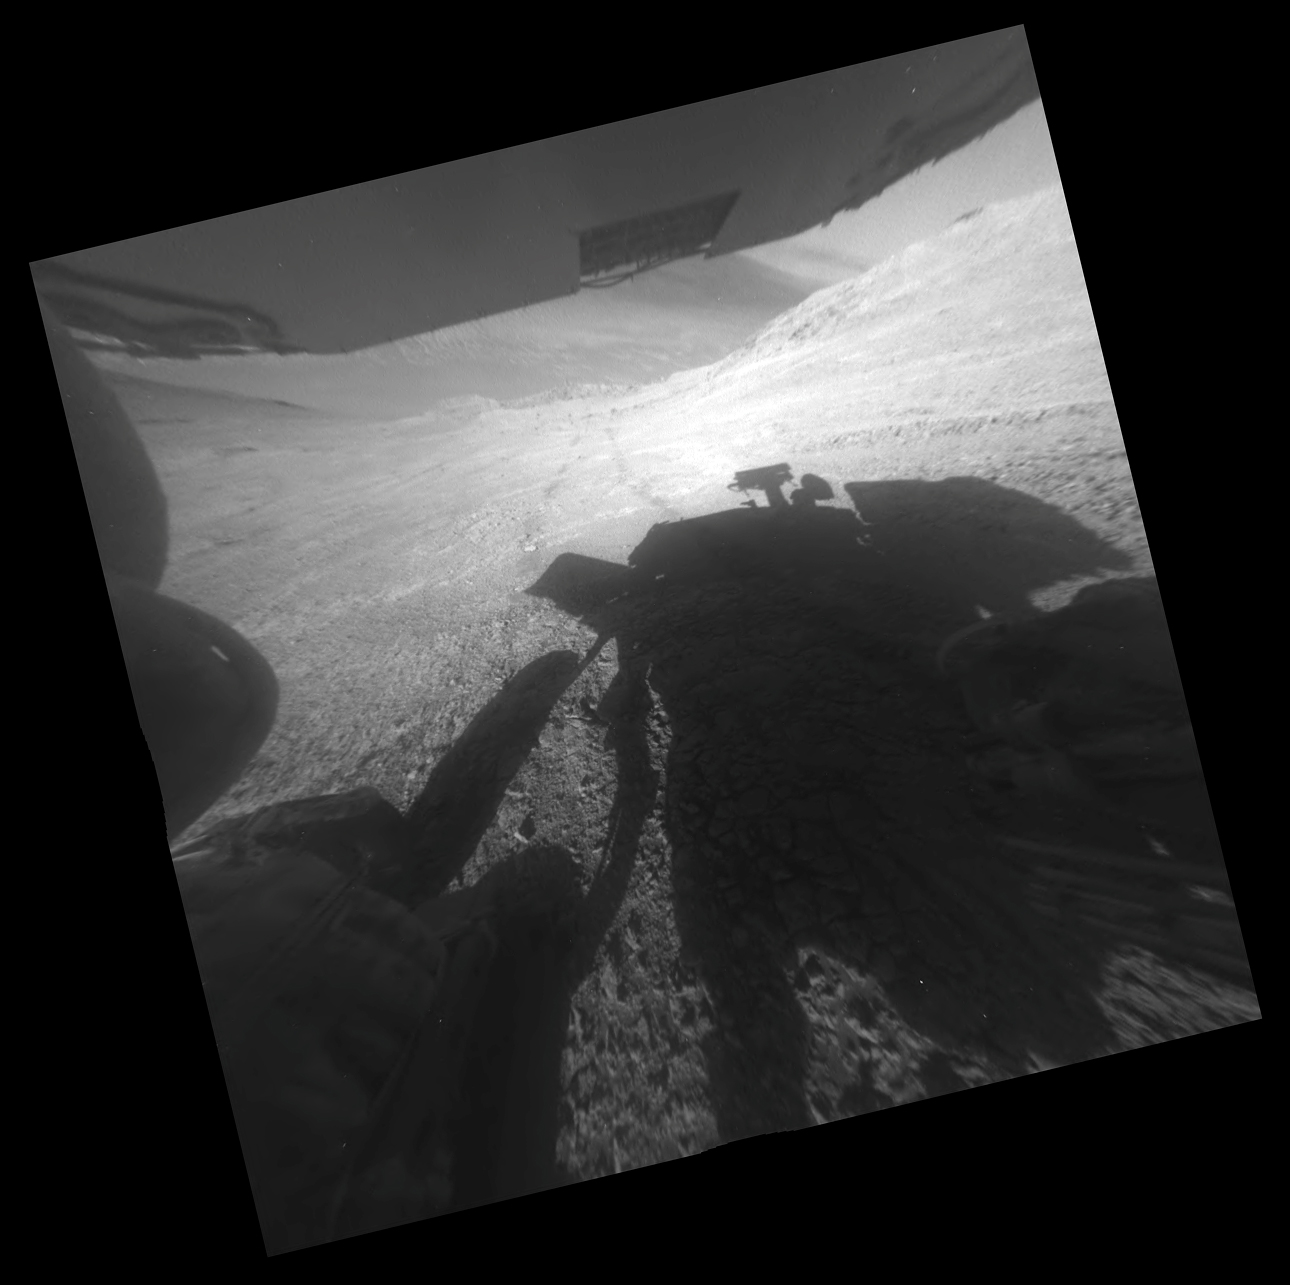 View from the Opportunity rover looking downhill from the steep hillside. Part of the floor of Endeavor crater can be seen beneath the underside of one of the solar panels. Image Credit: NASA/JPL-Caltech